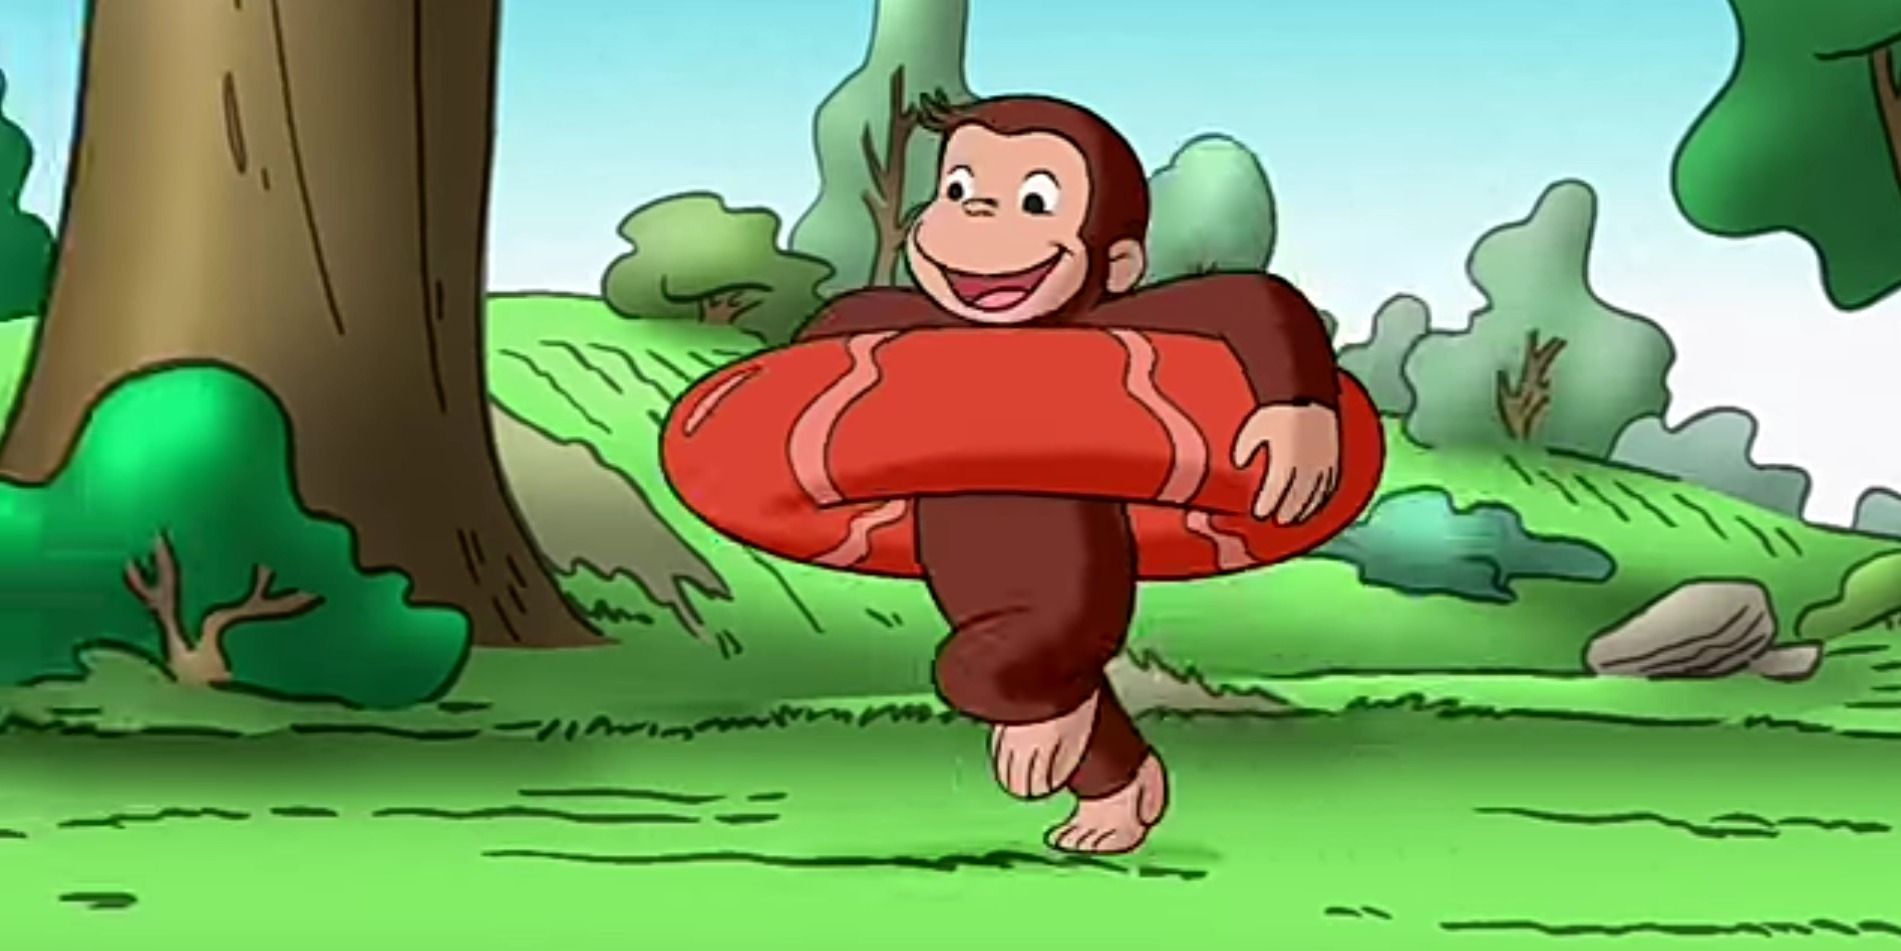 A screenshot from Curious George.